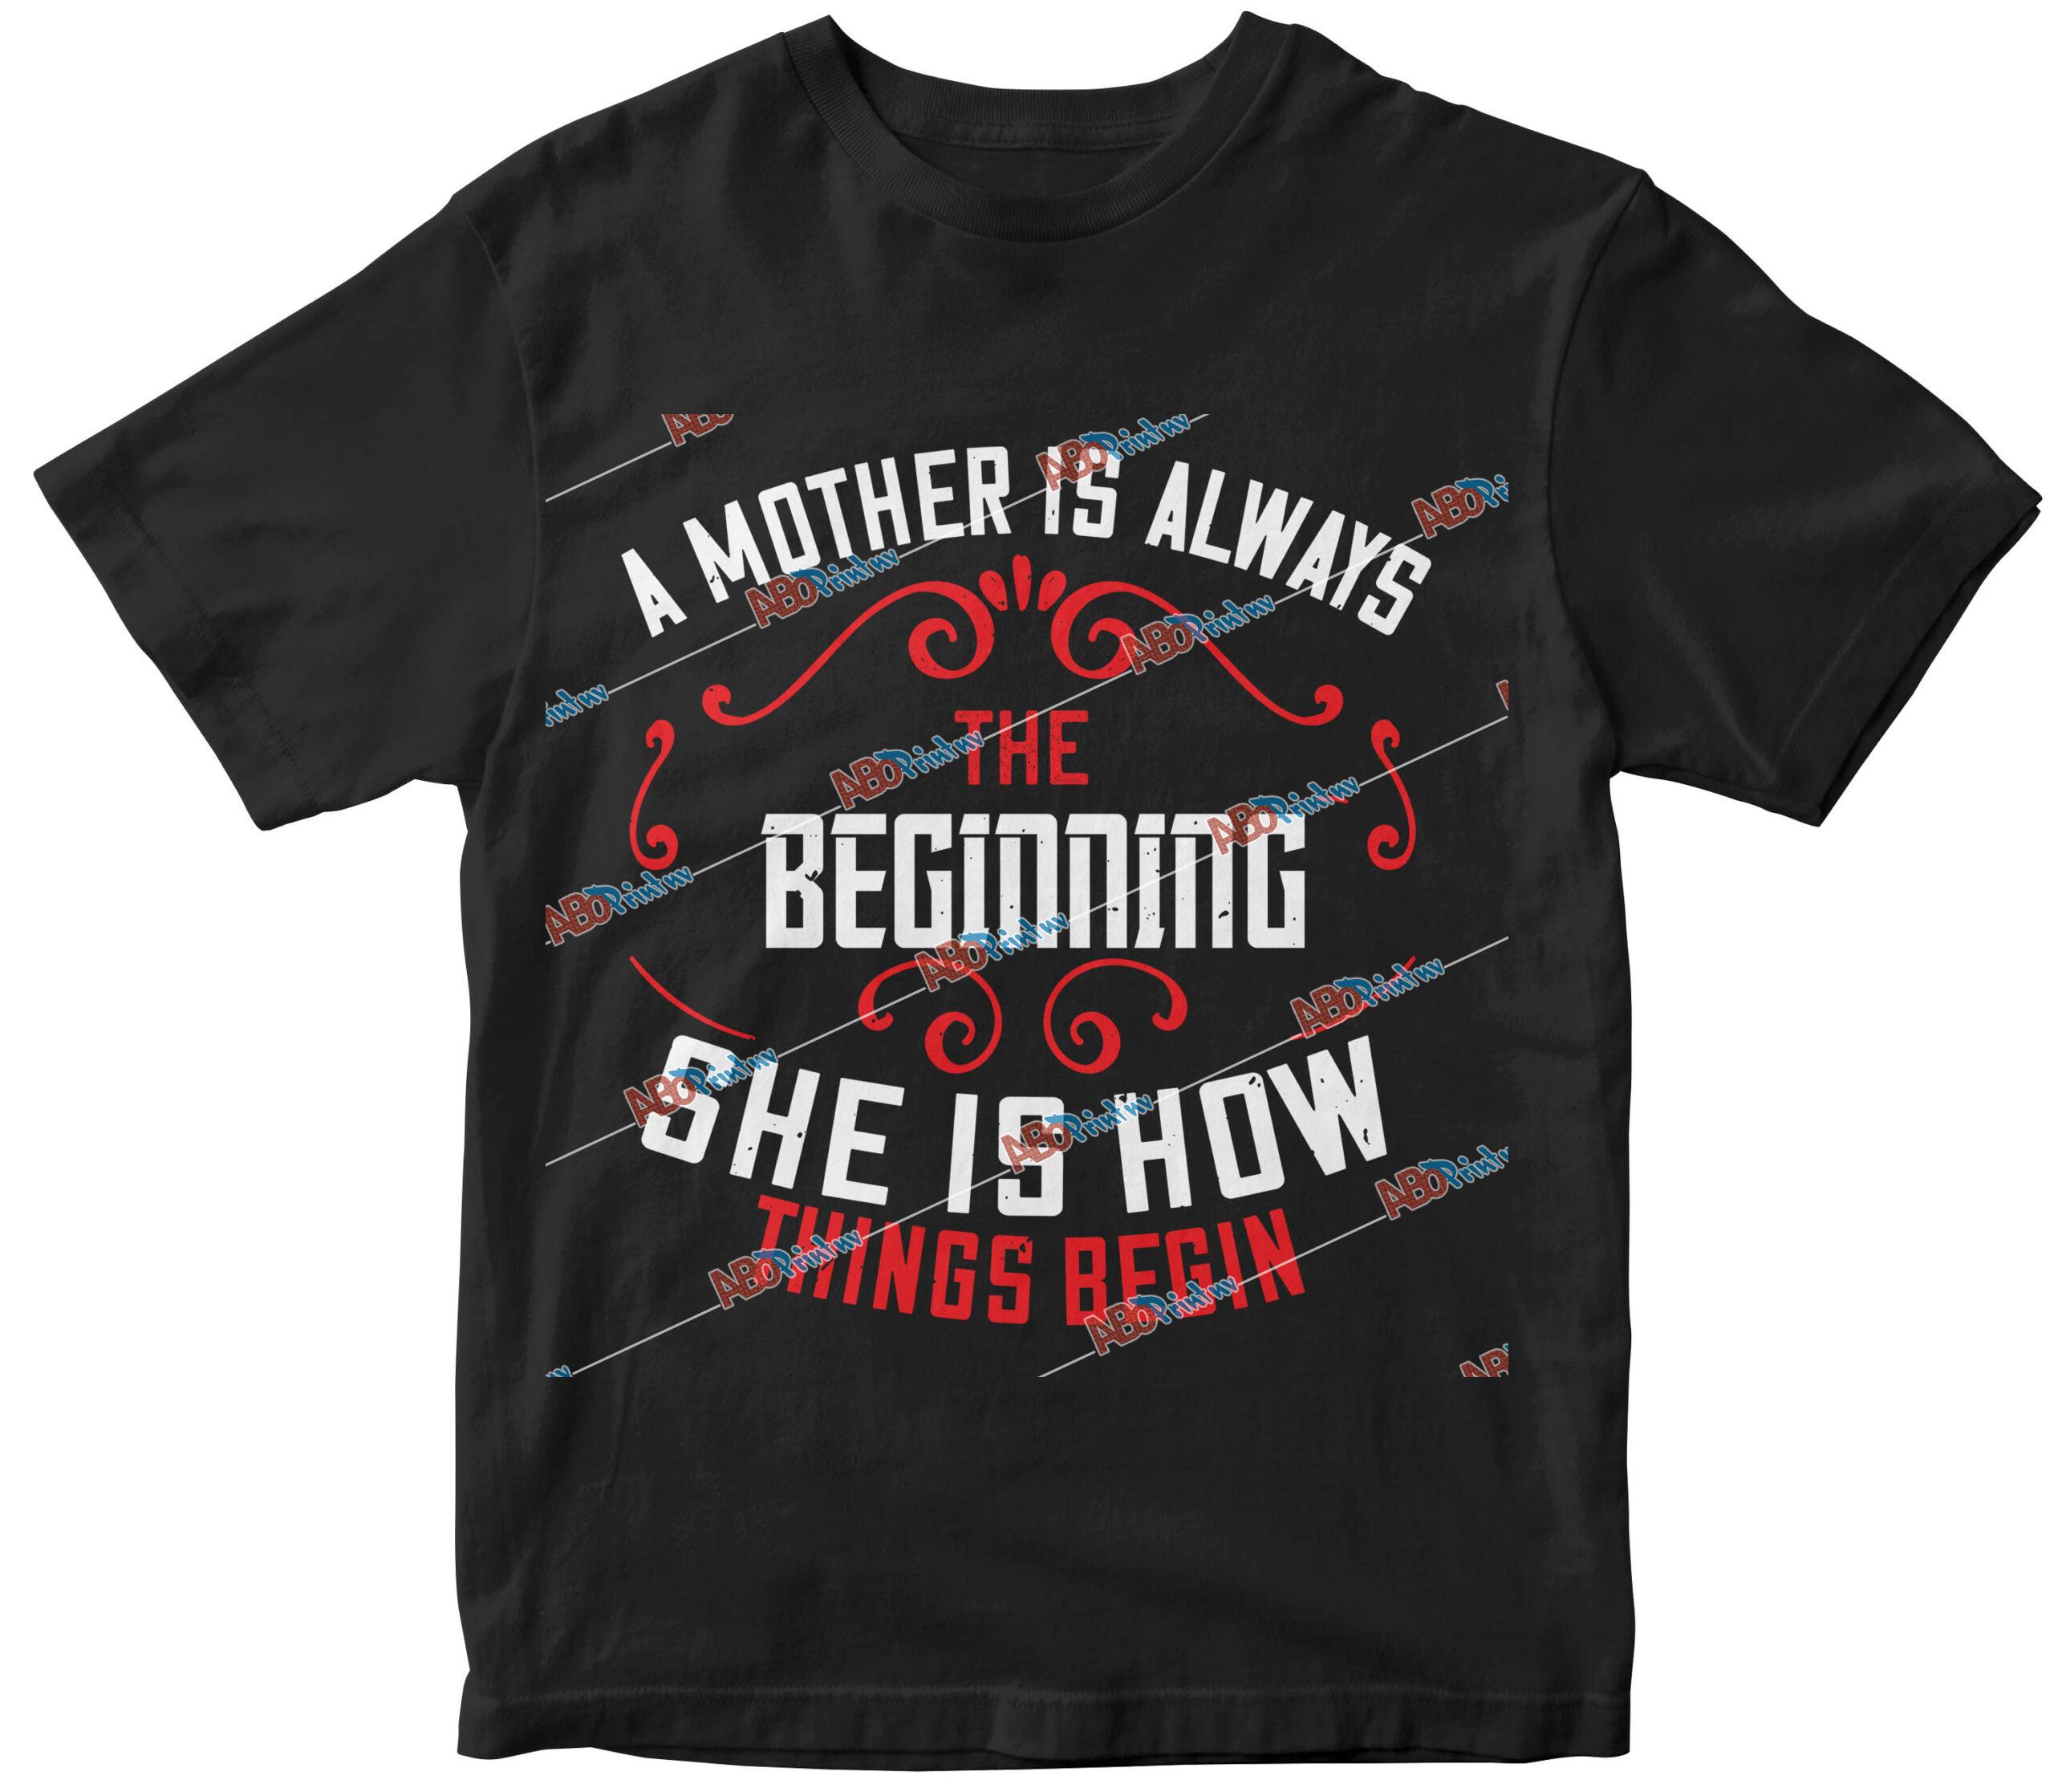 A mother is always the beginning. She is how things begin.jpg